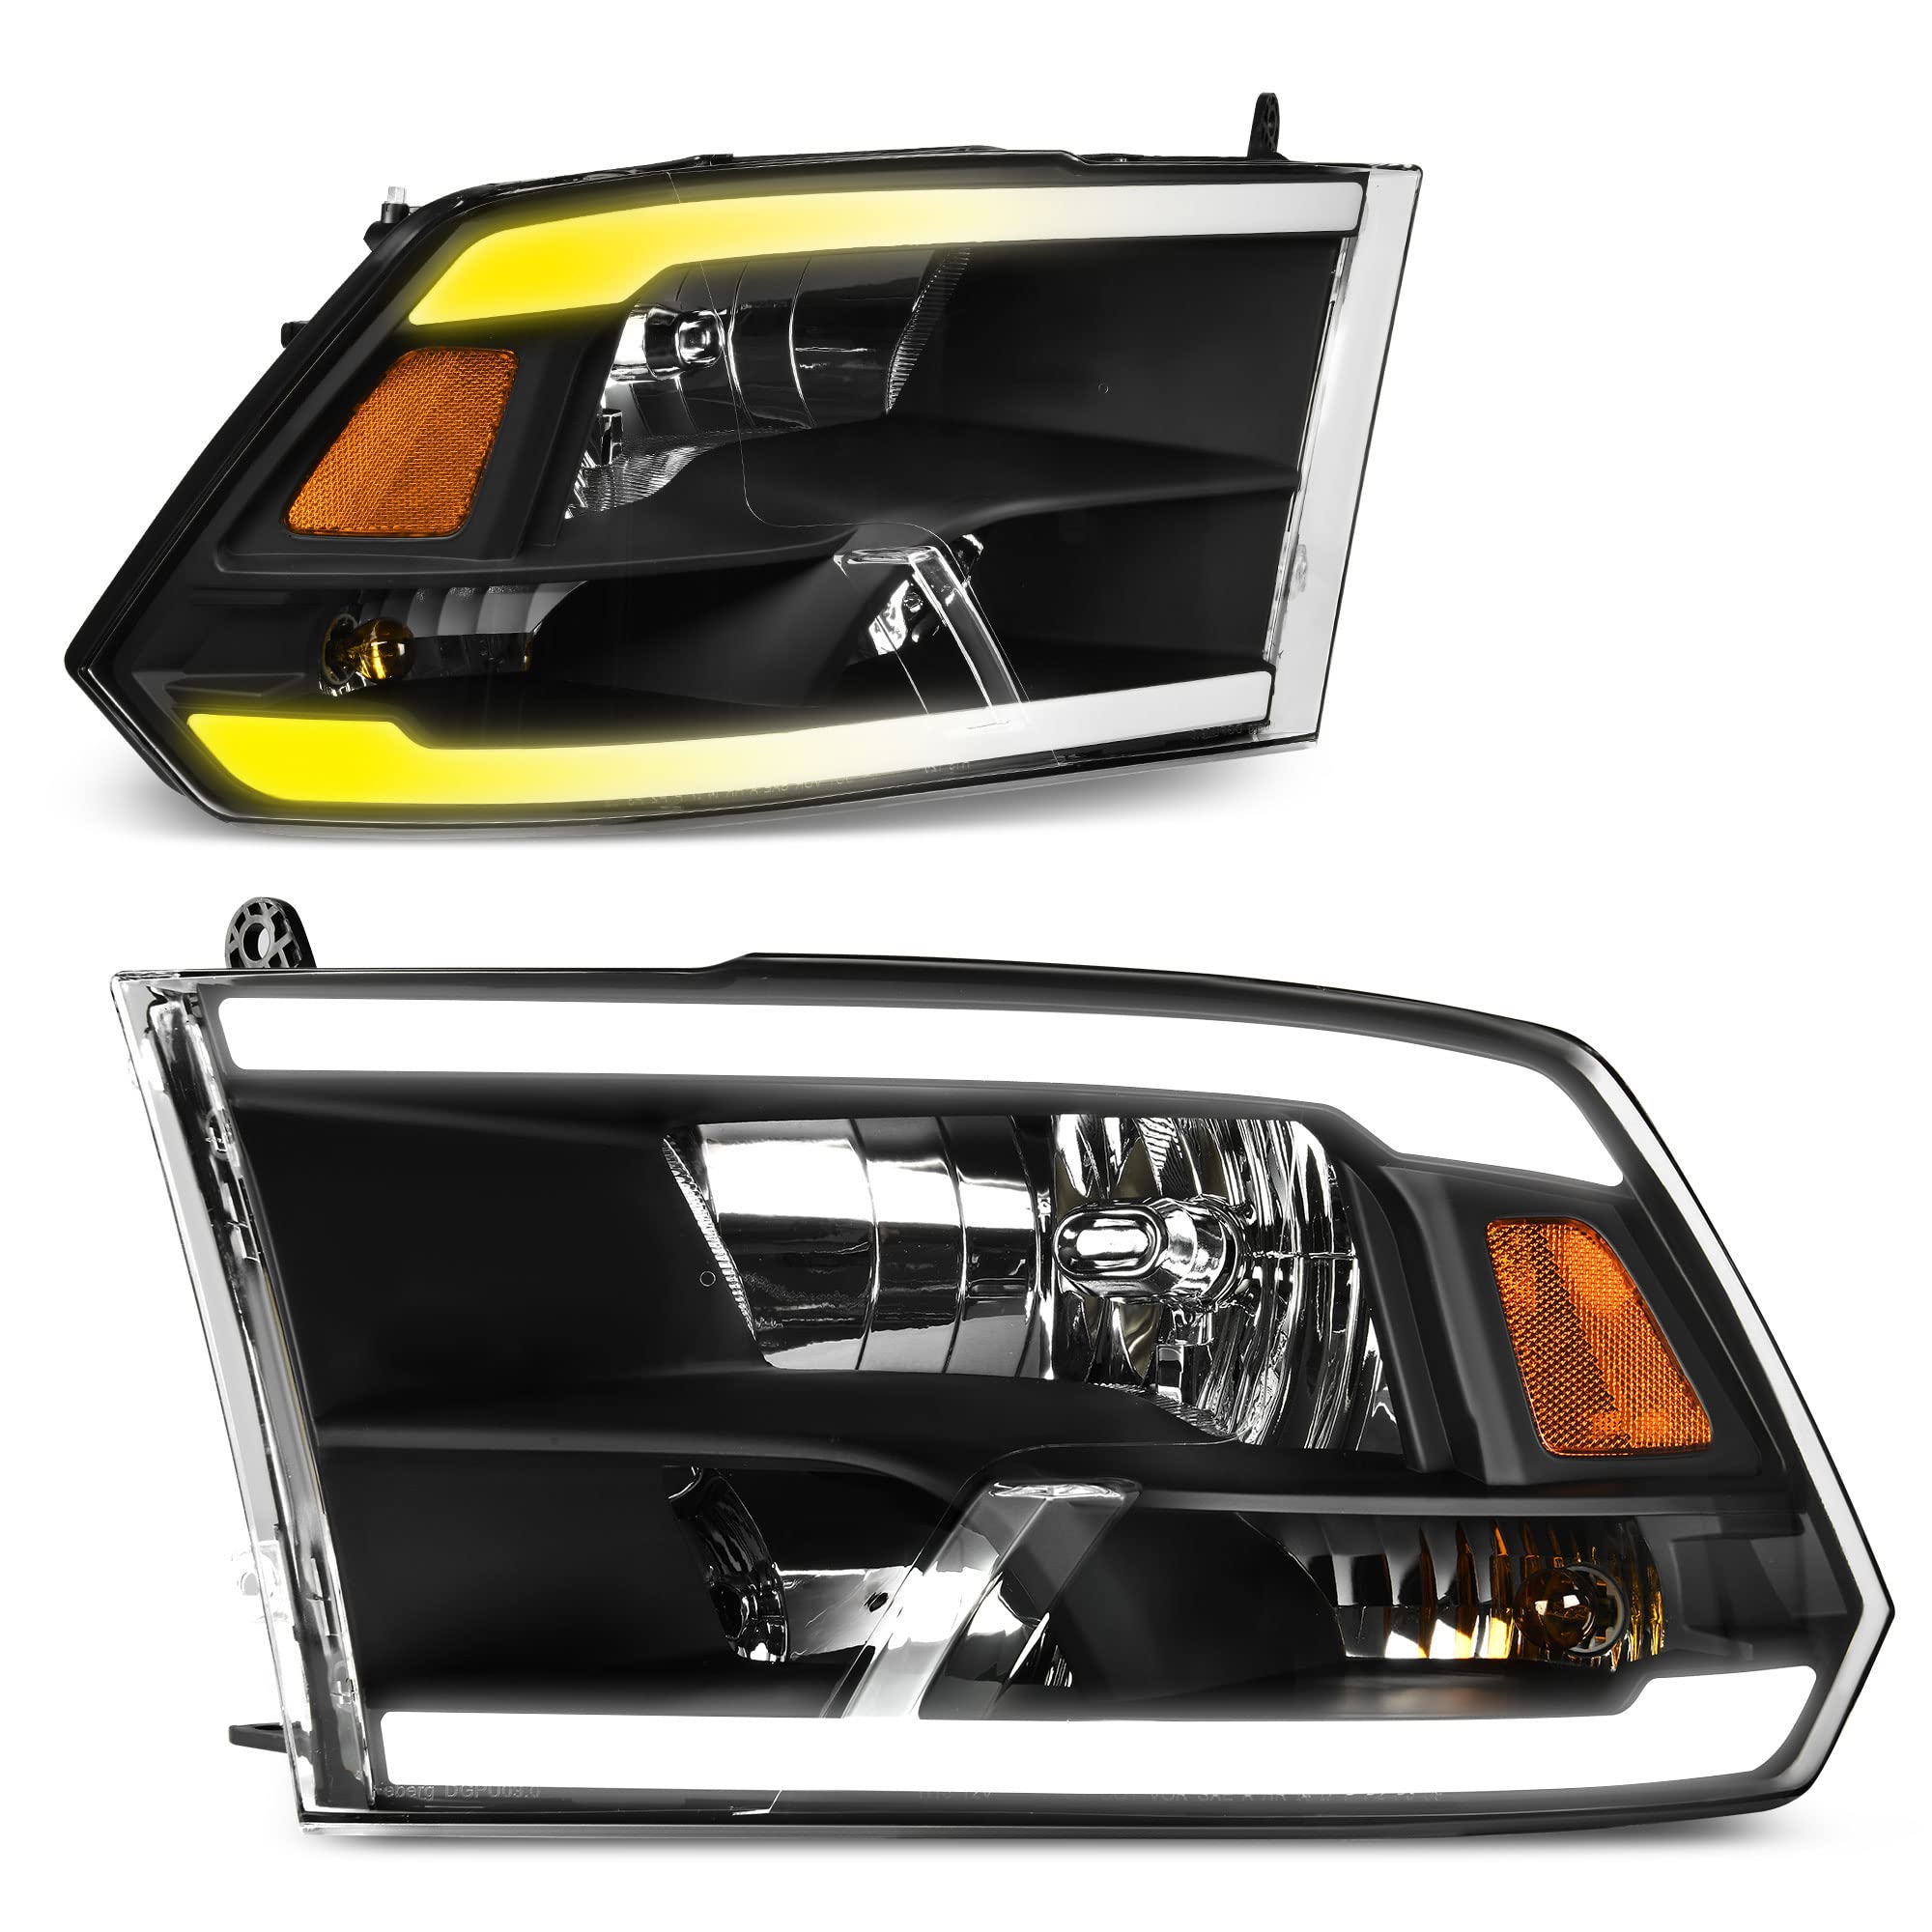 AUTOSAVER88 LED DRL Switchback Headlight Assembly compatible with 2009-2018 Dodge Ram 1500 2500 35002019-2022 Ram 1500 classic R